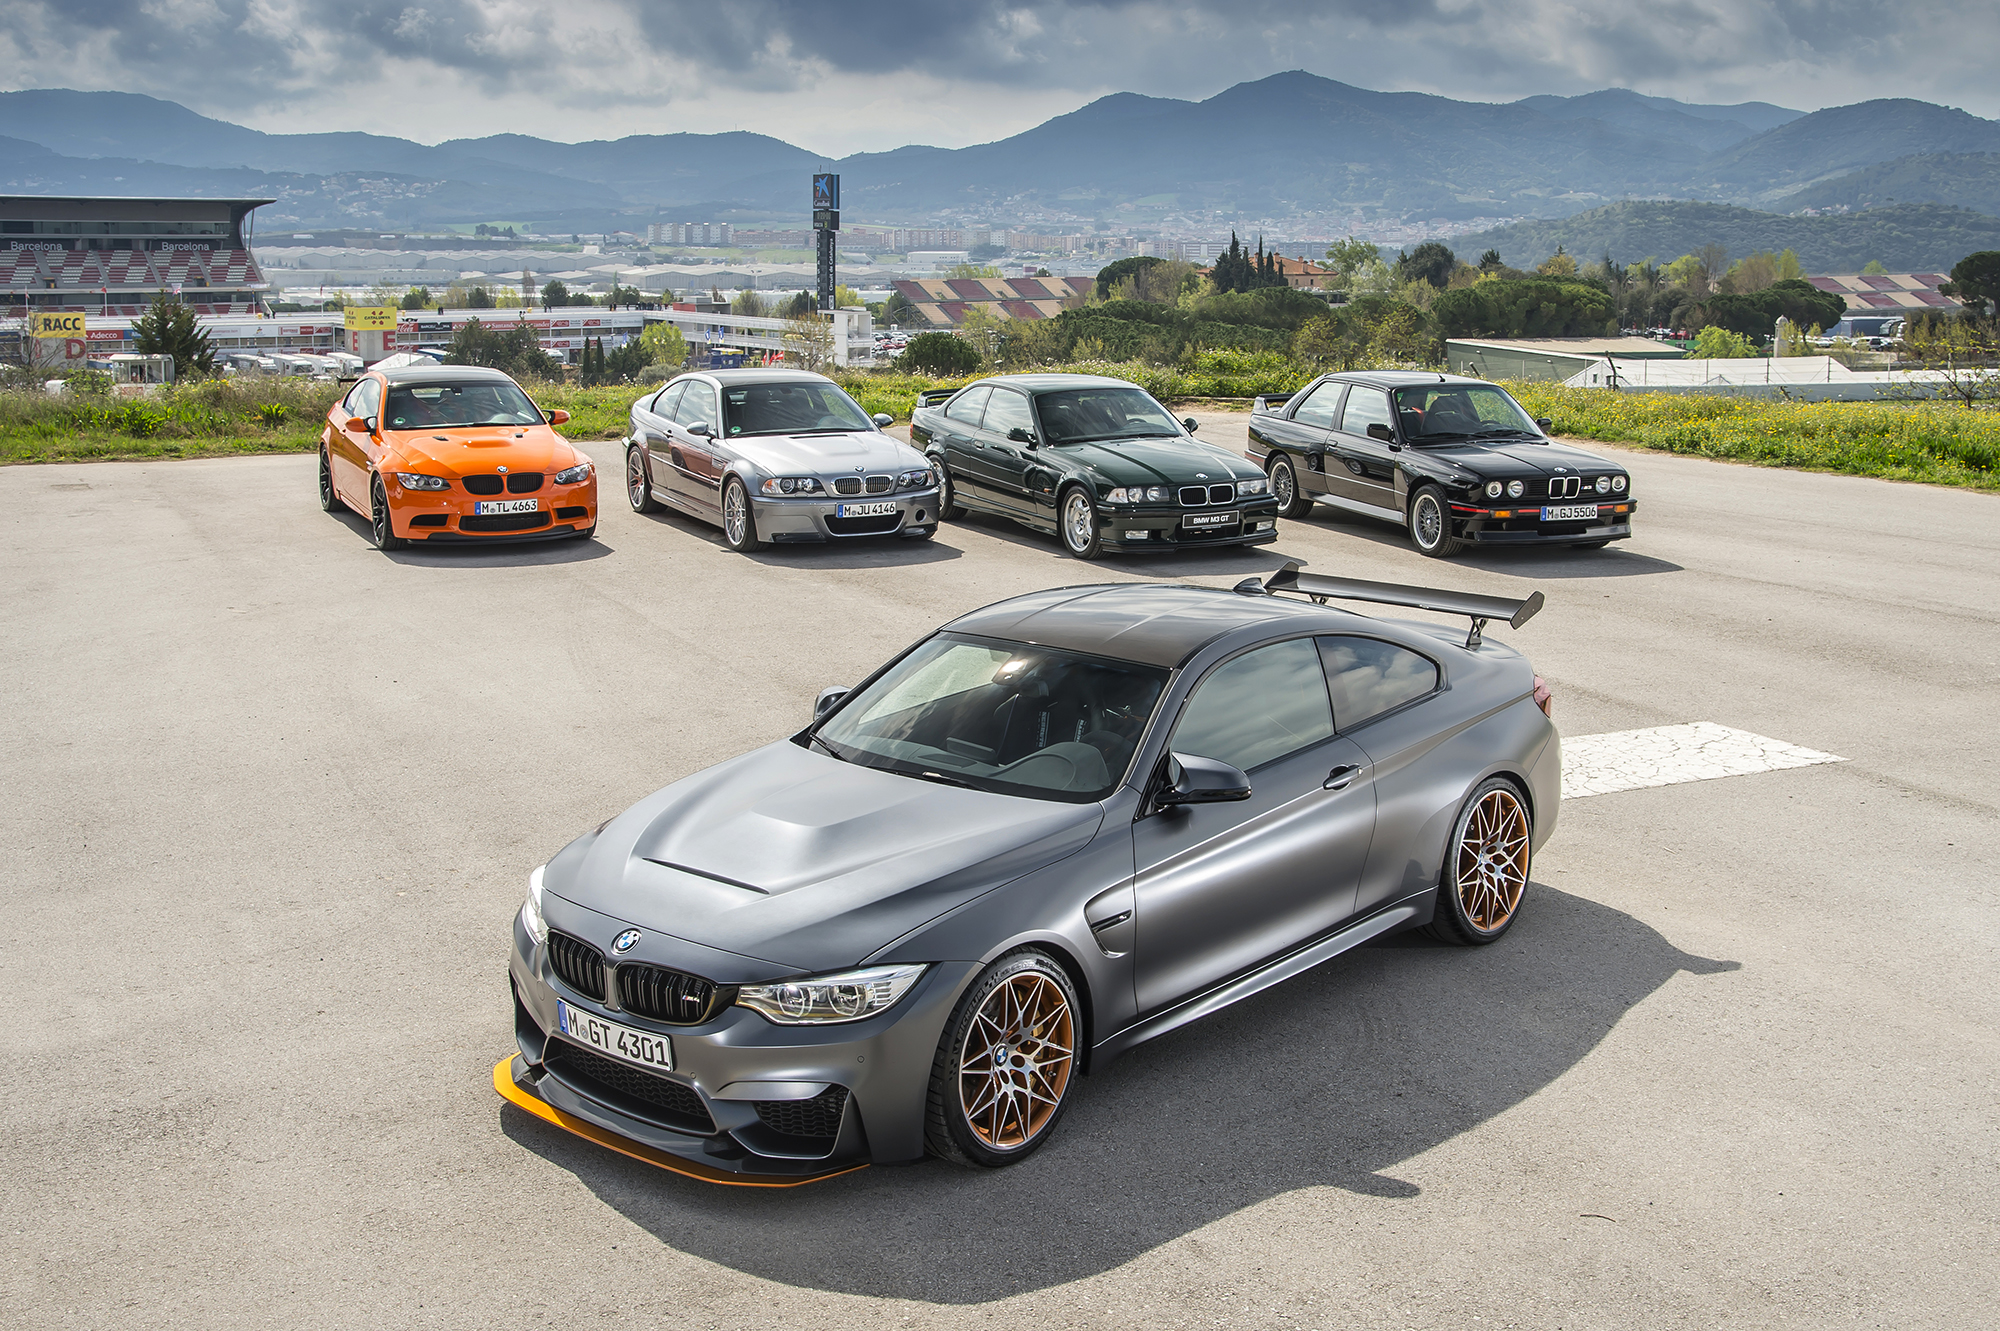 2016 BMW M4 GTS Launched - BimmerLife